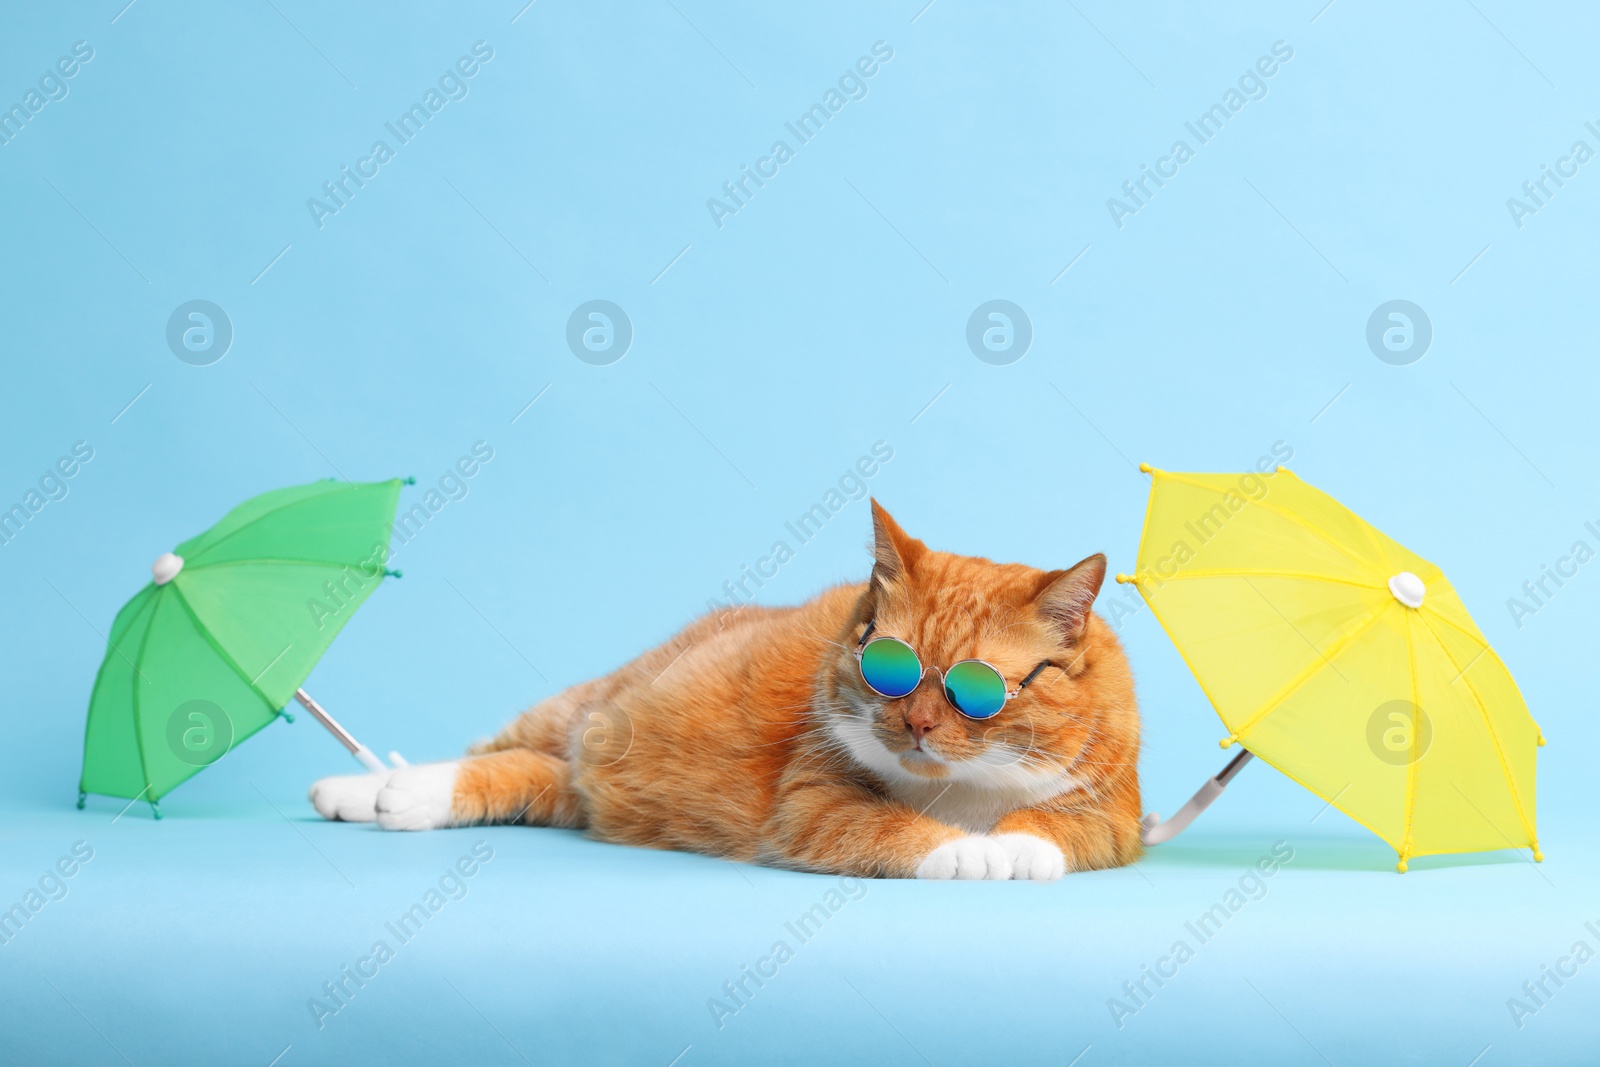 Photo of Cute ginger cat in stylish sunglasses resting between beach umbrellas on light blue background